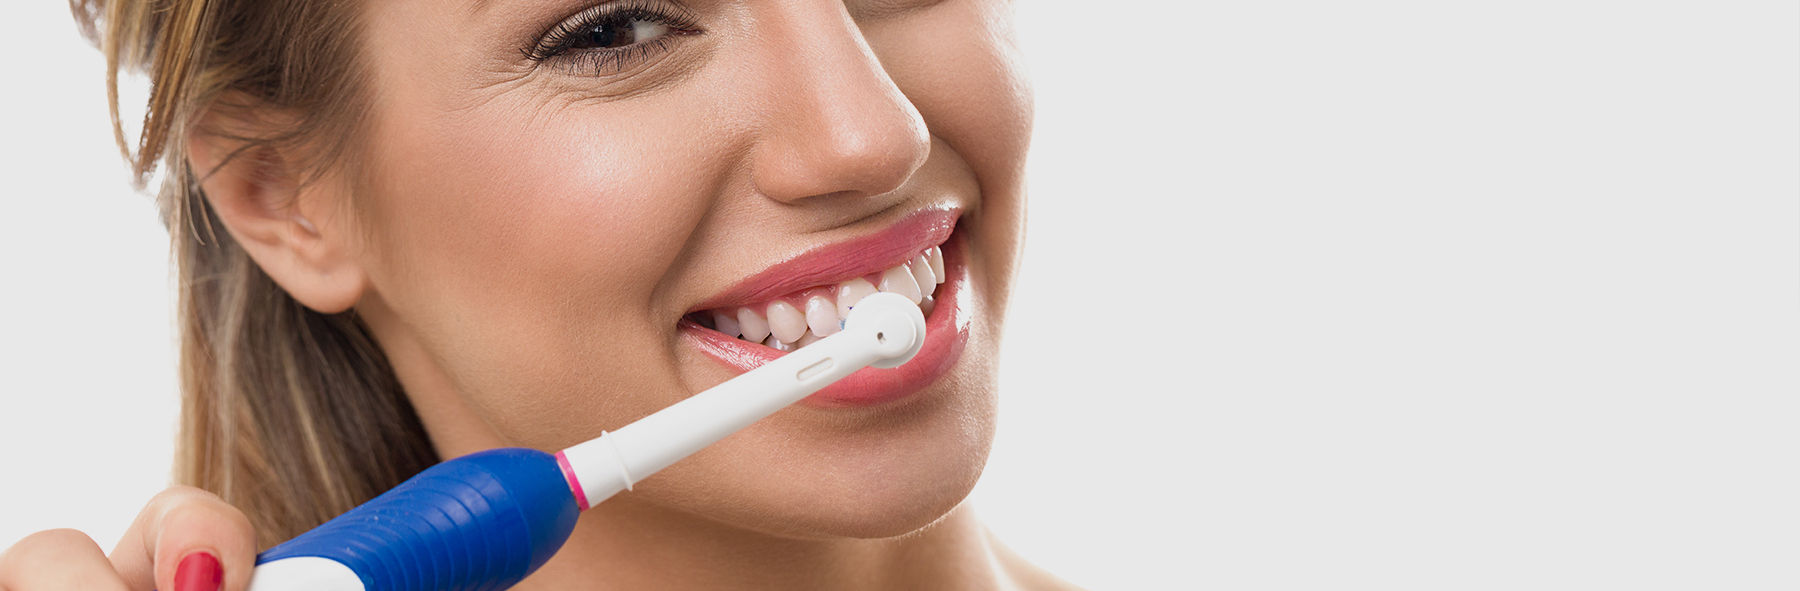 Our guide to tooth brushing